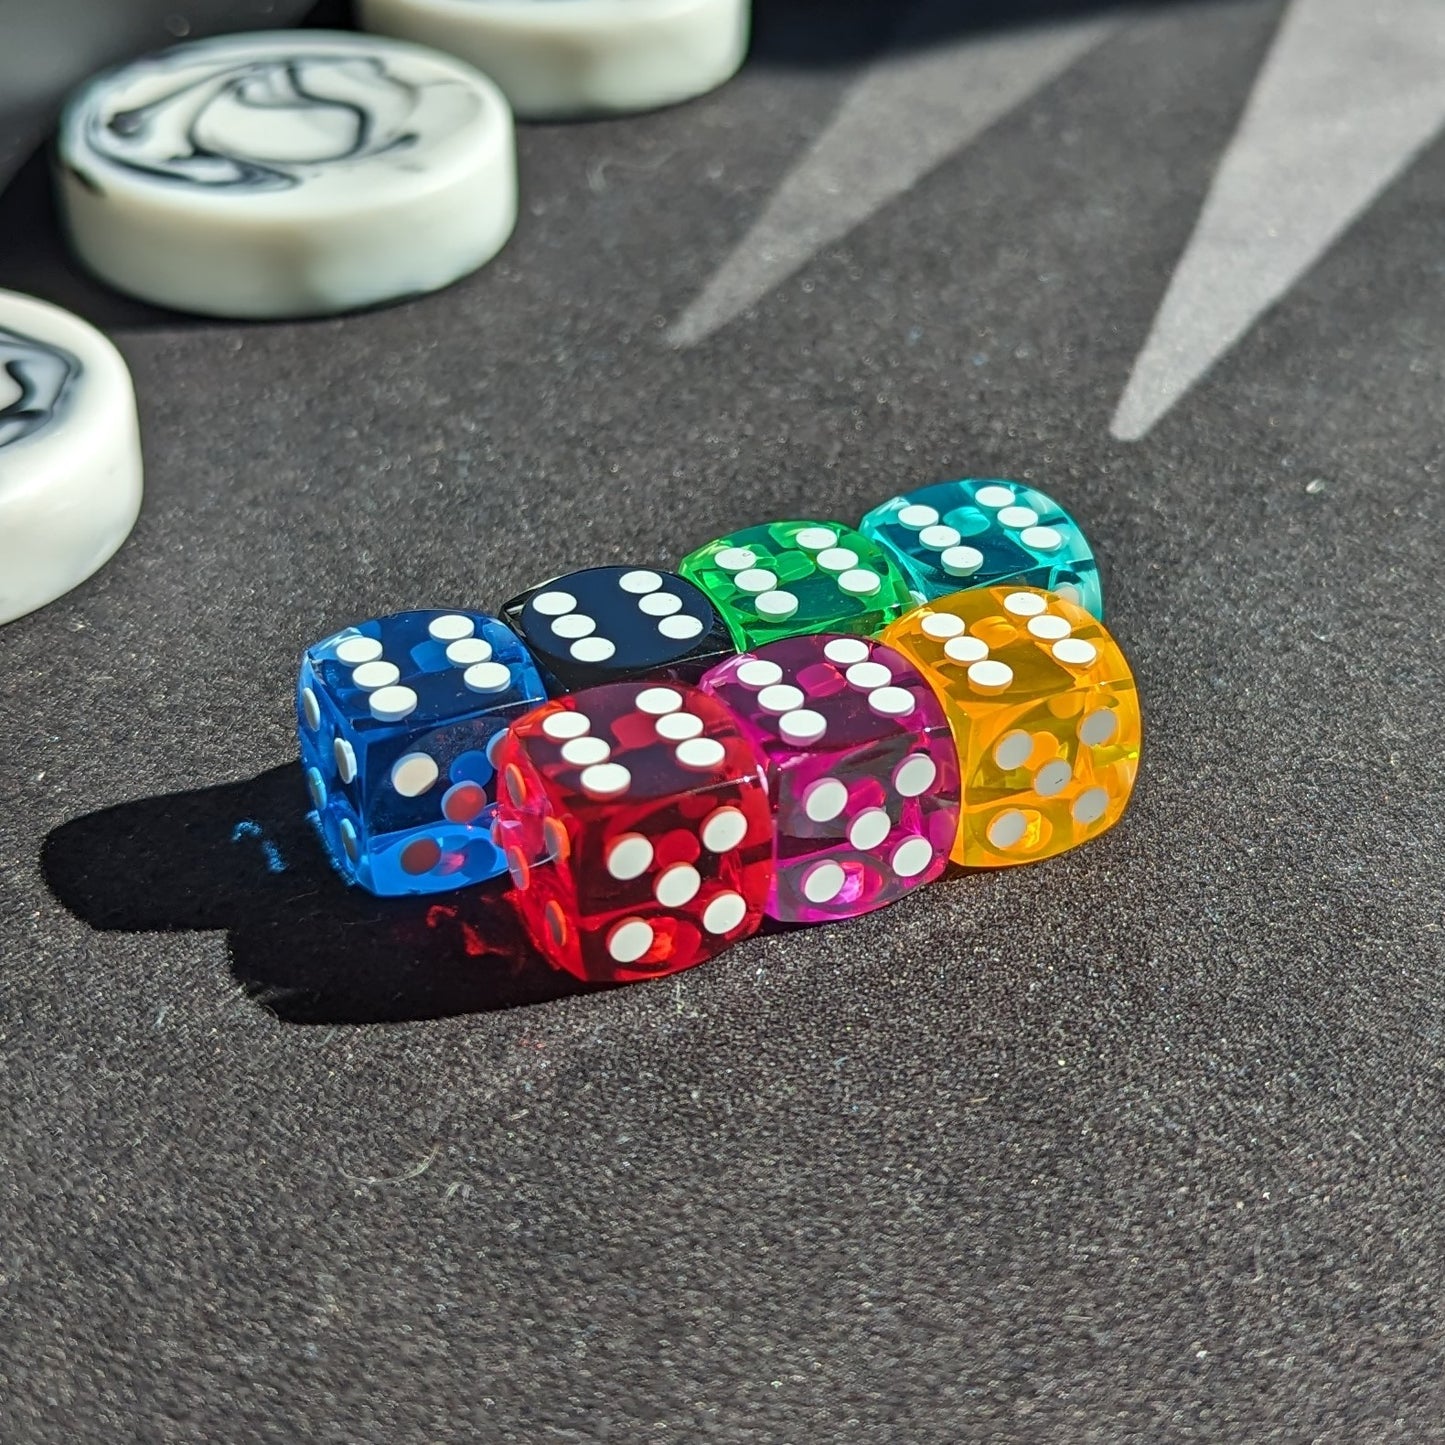 Precision dice pair, Multiple Colors and Sizes